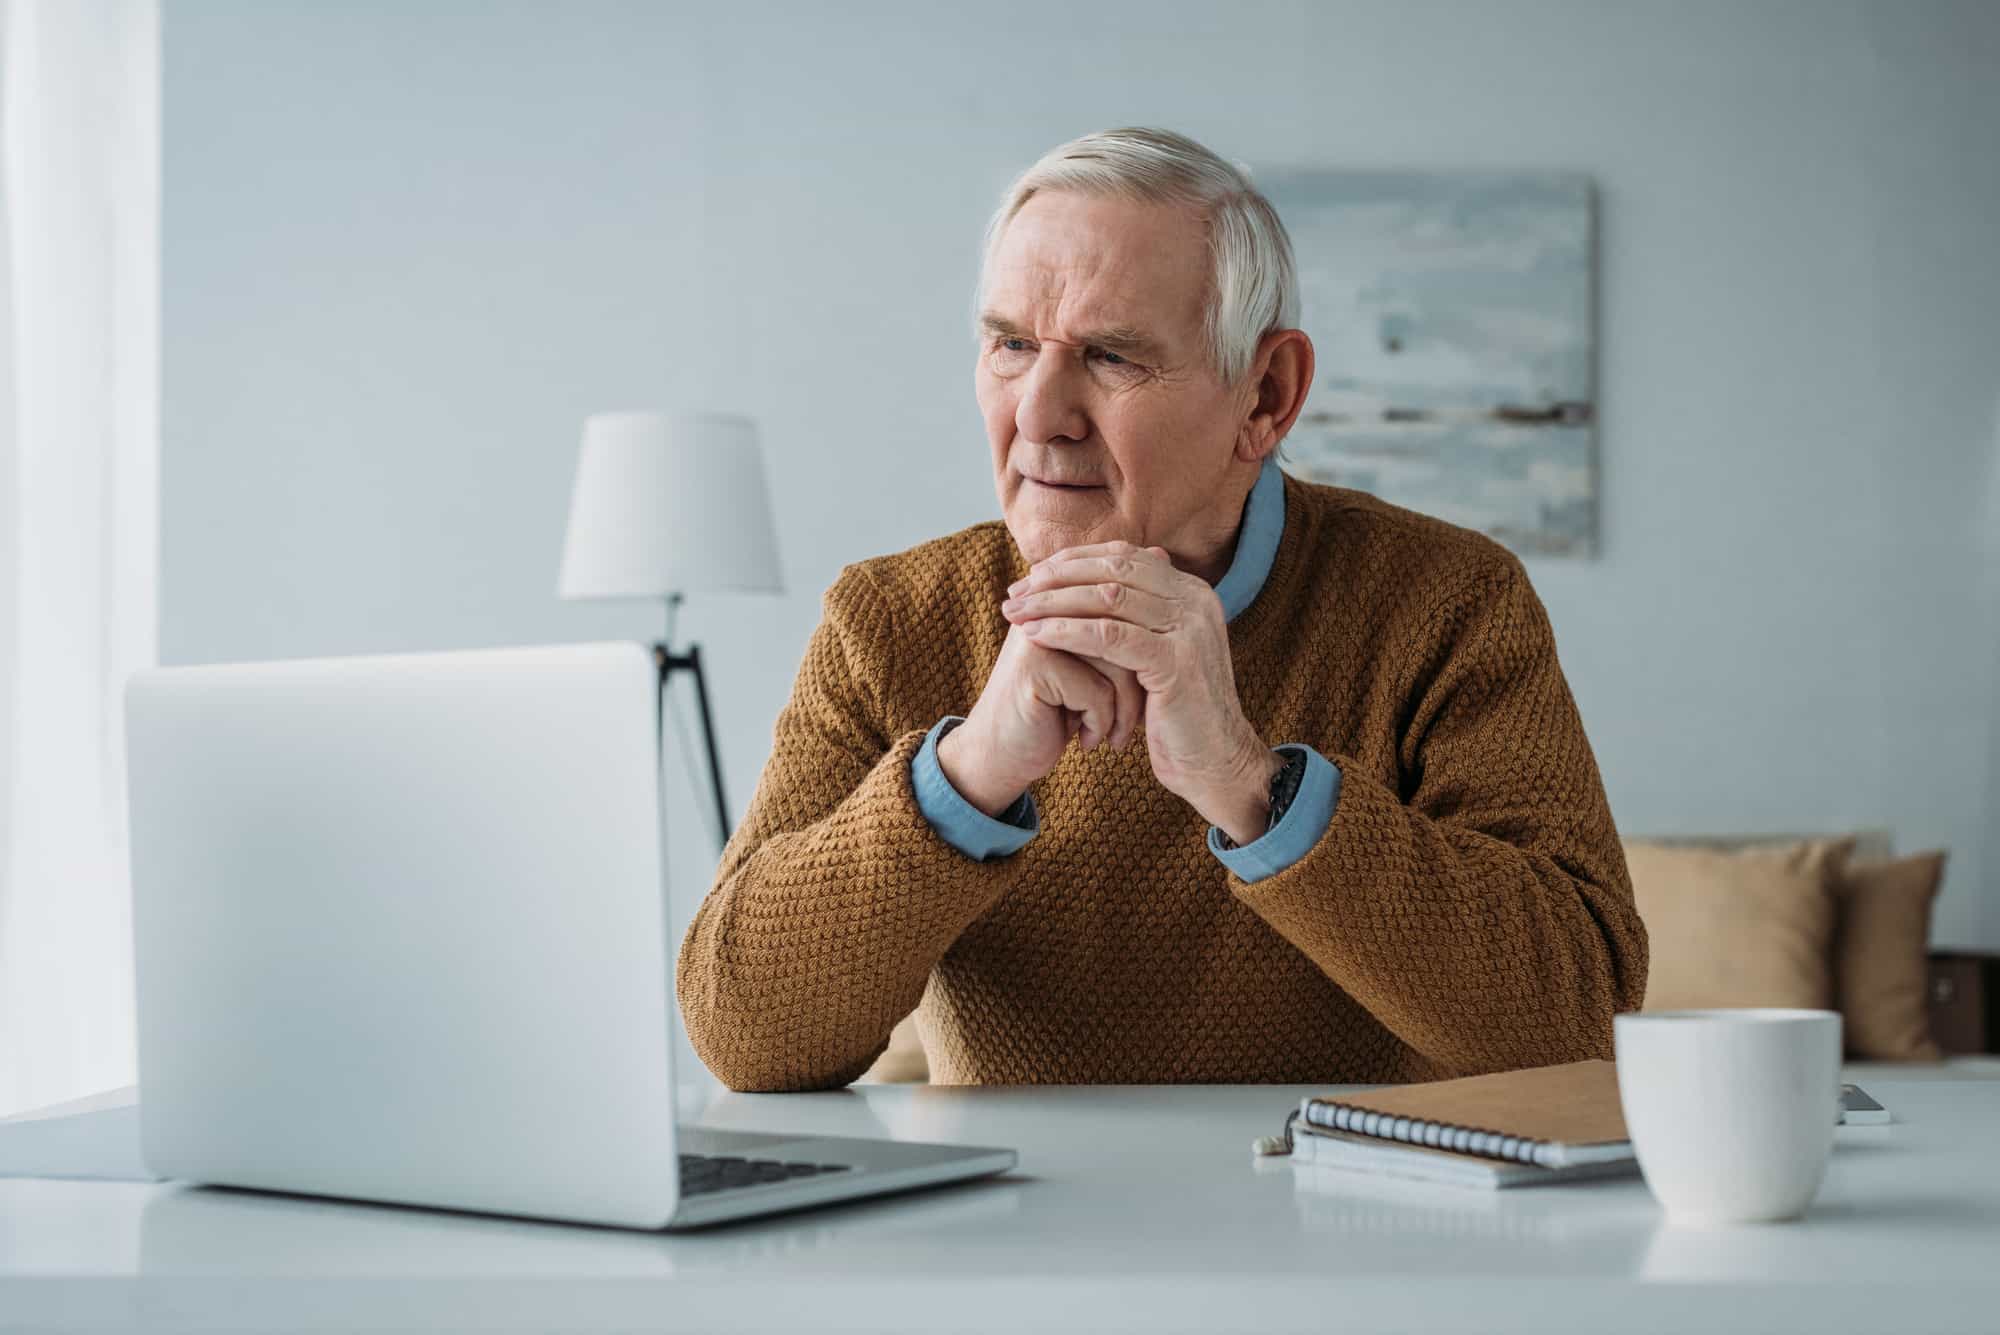 Elderly man in a sweater sitting at a desk, looking thoughtfully at his laptop in a home office setting.